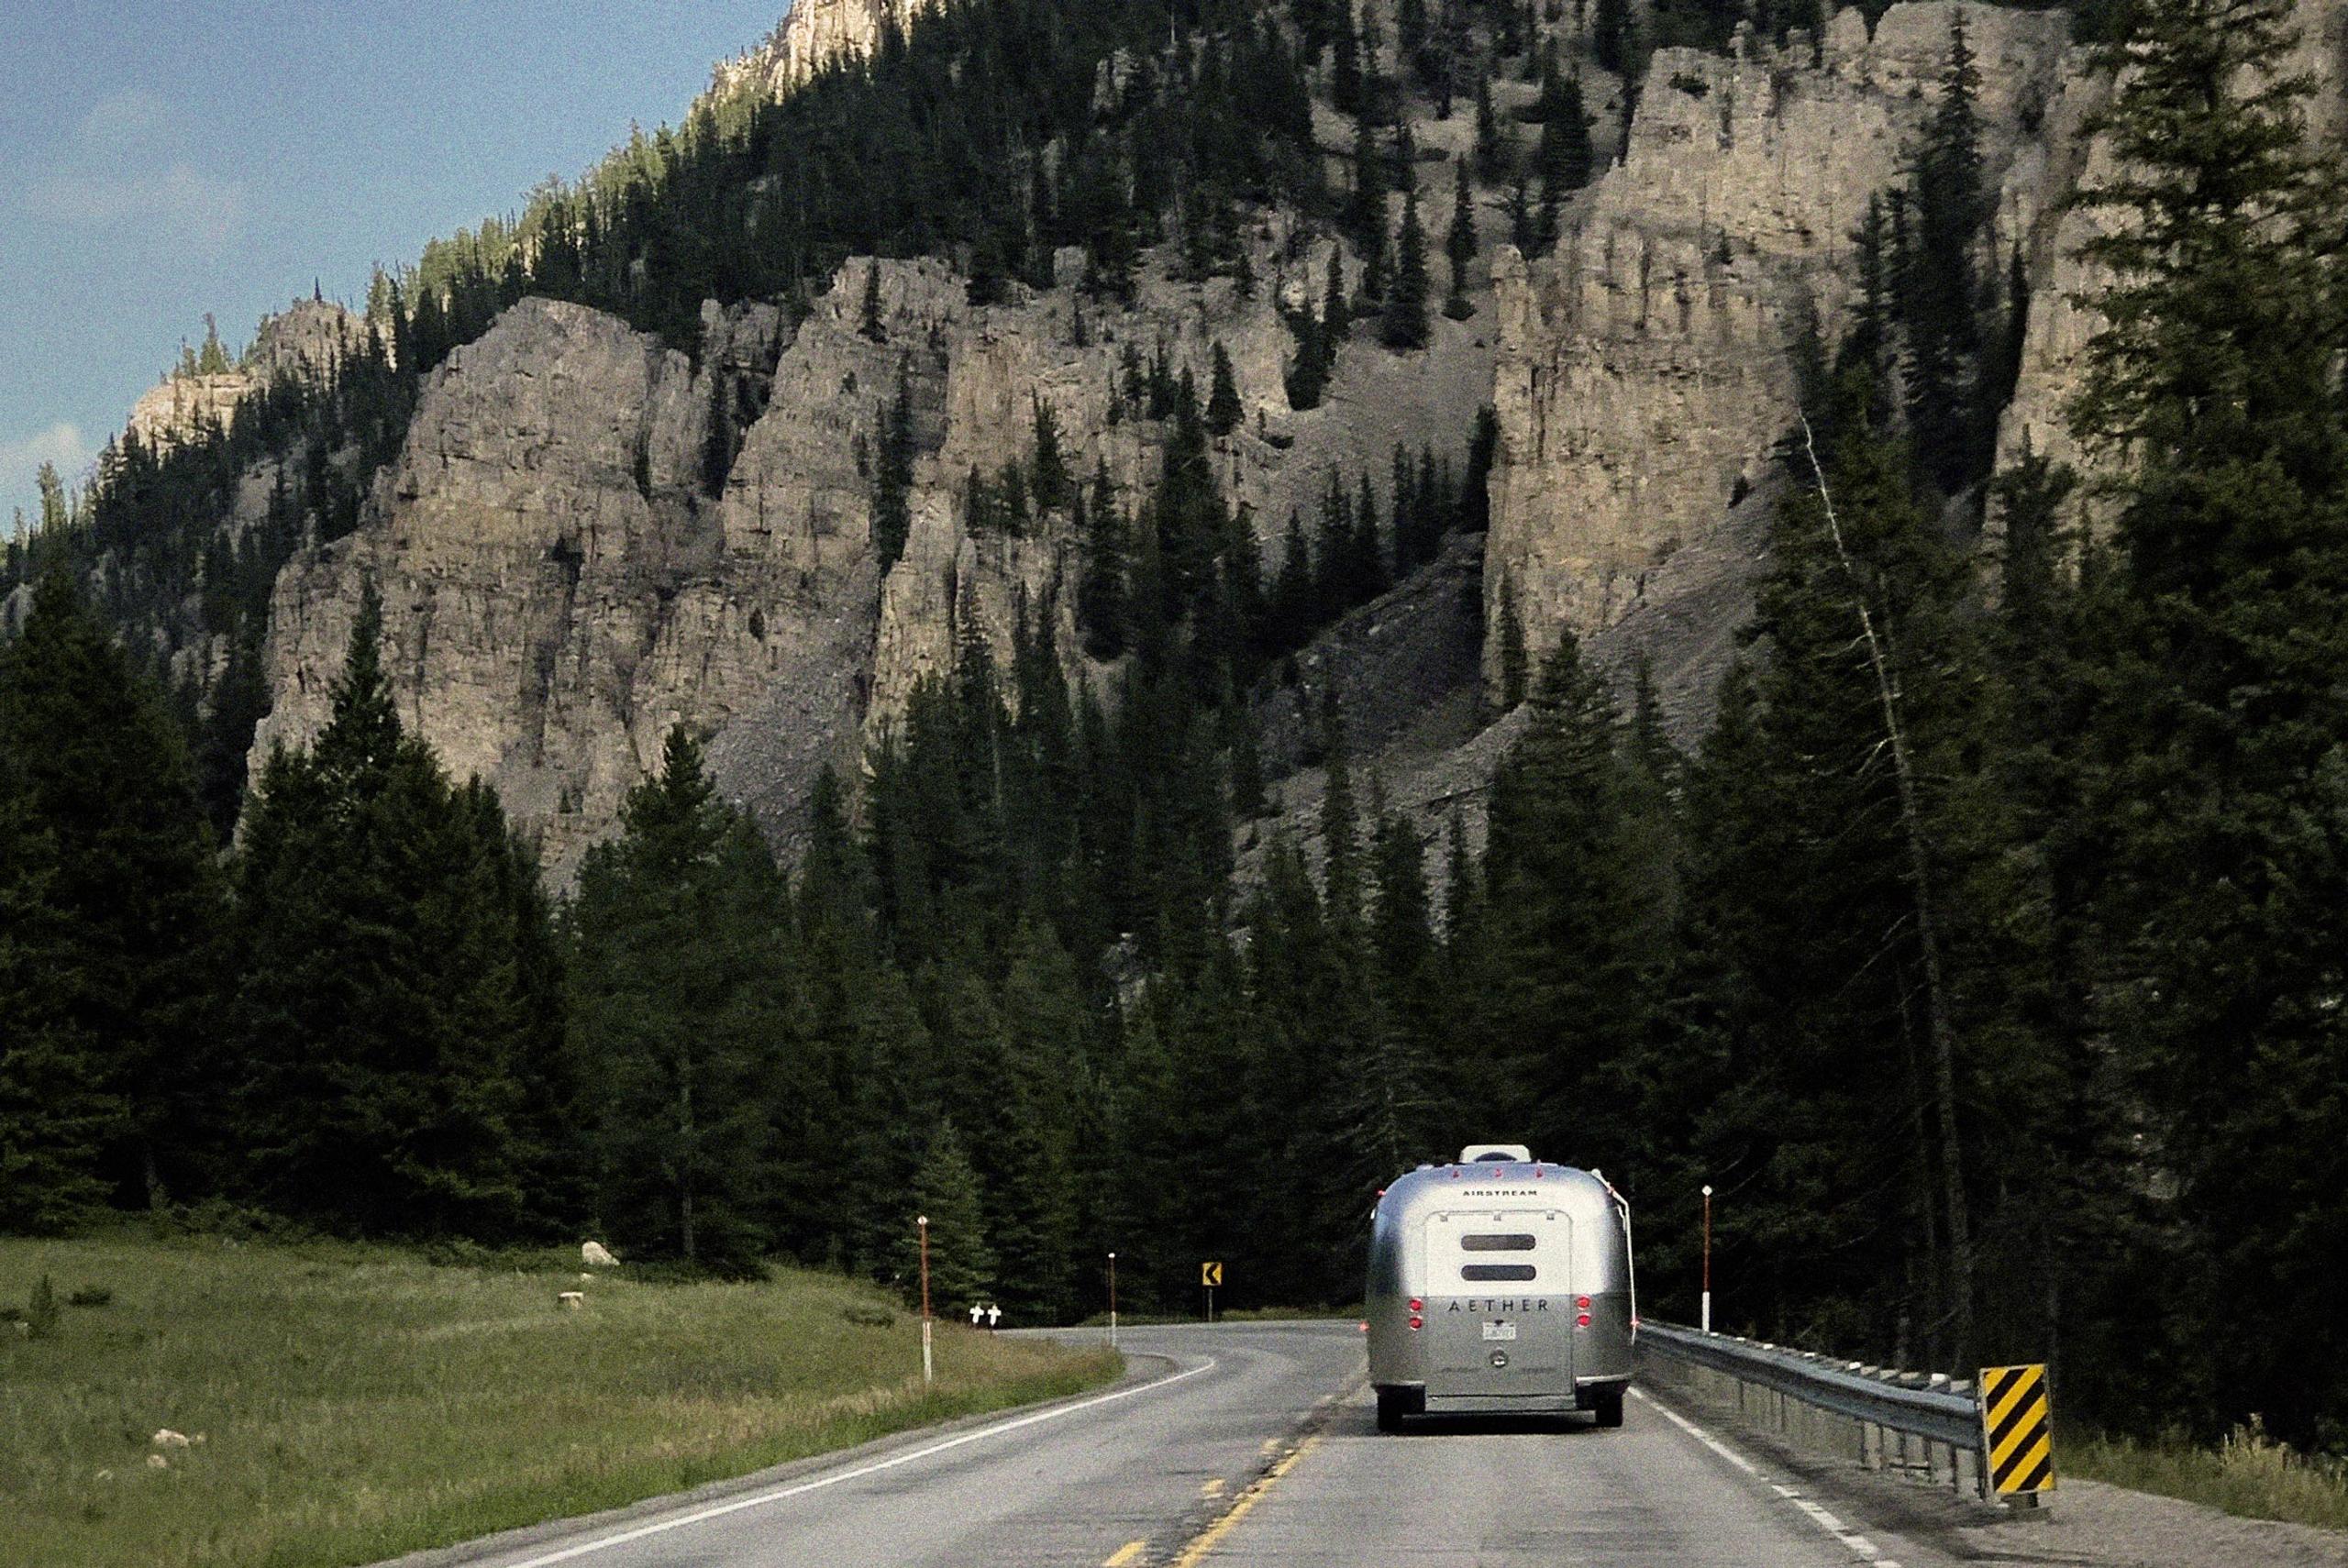 Aether Apparel airstream on the road